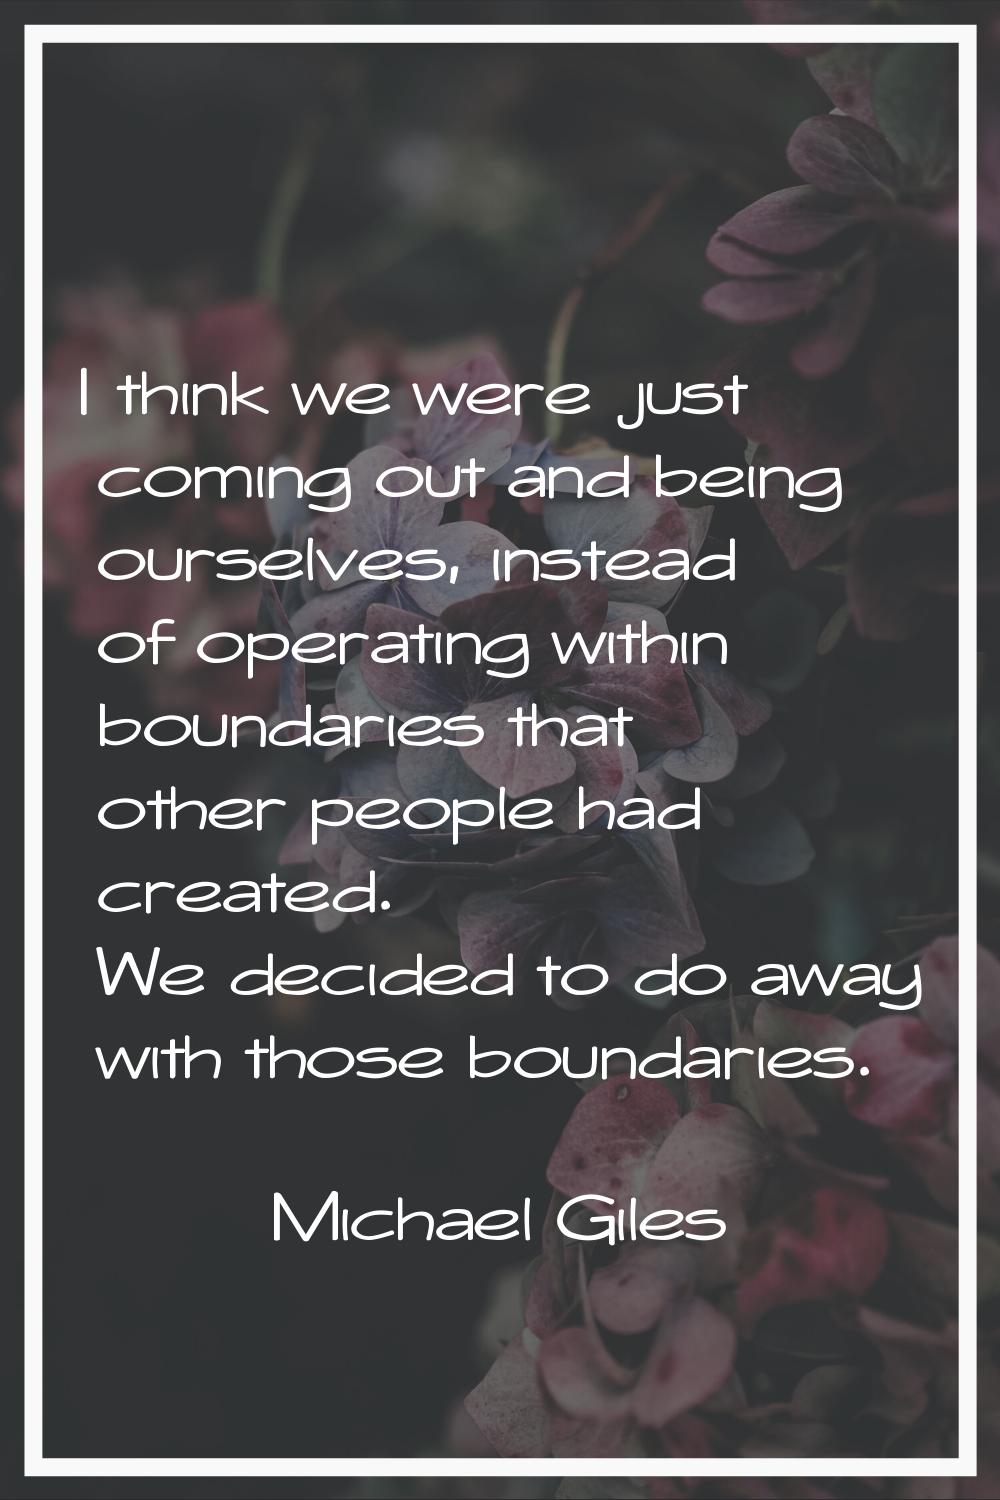 I think we were just coming out and being ourselves, instead of operating within boundaries that ot